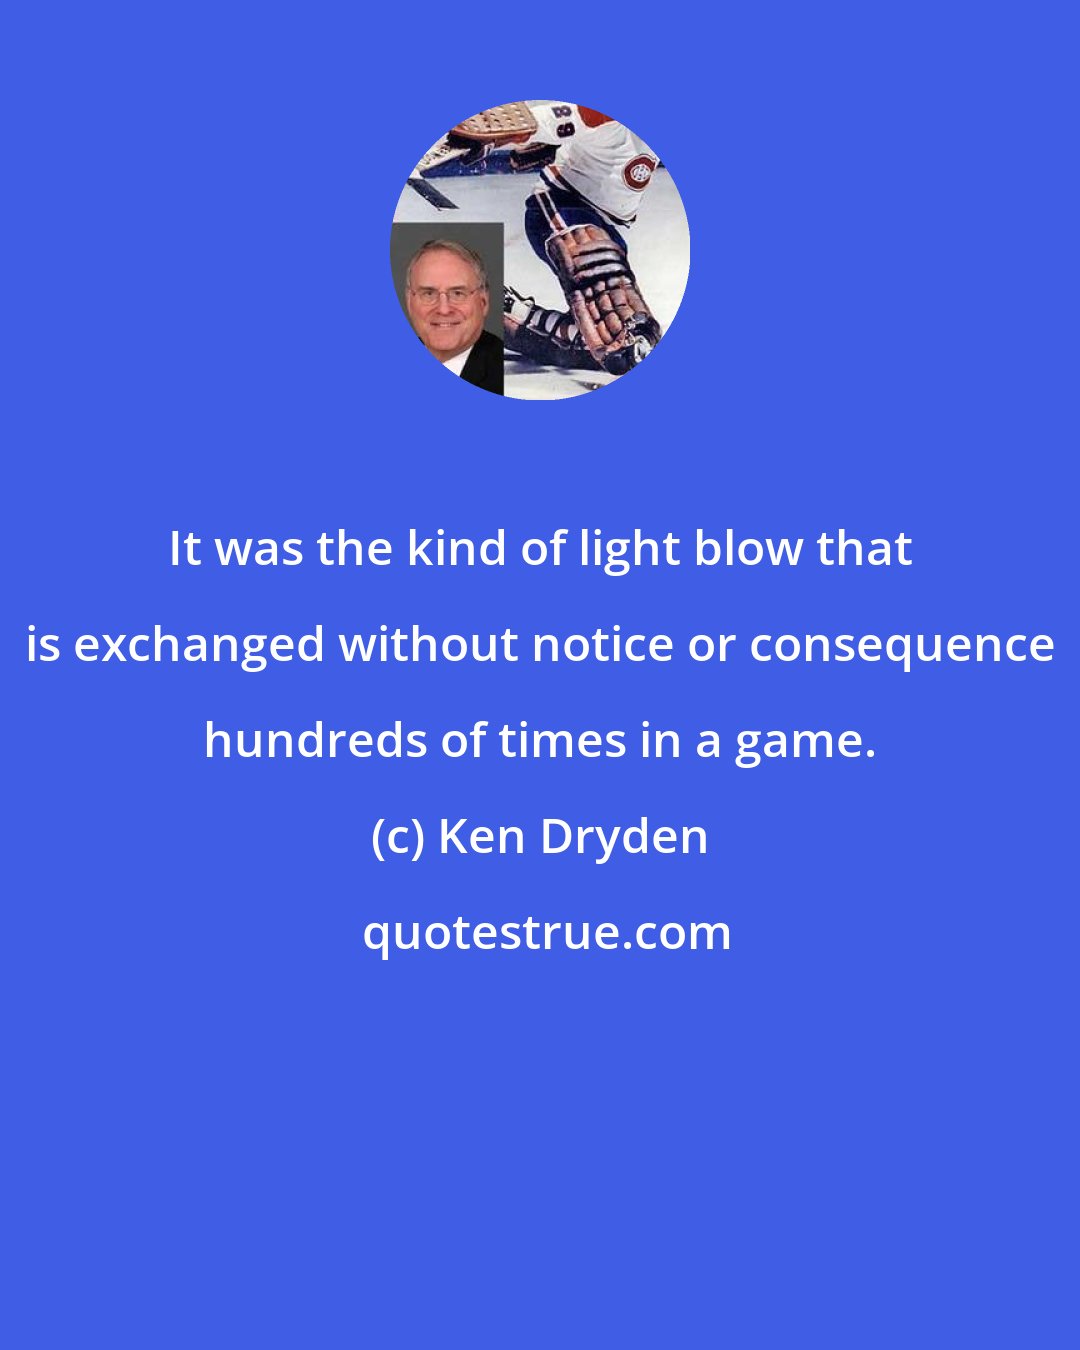 Ken Dryden: It was the kind of light blow that is exchanged without notice or consequence hundreds of times in a game.